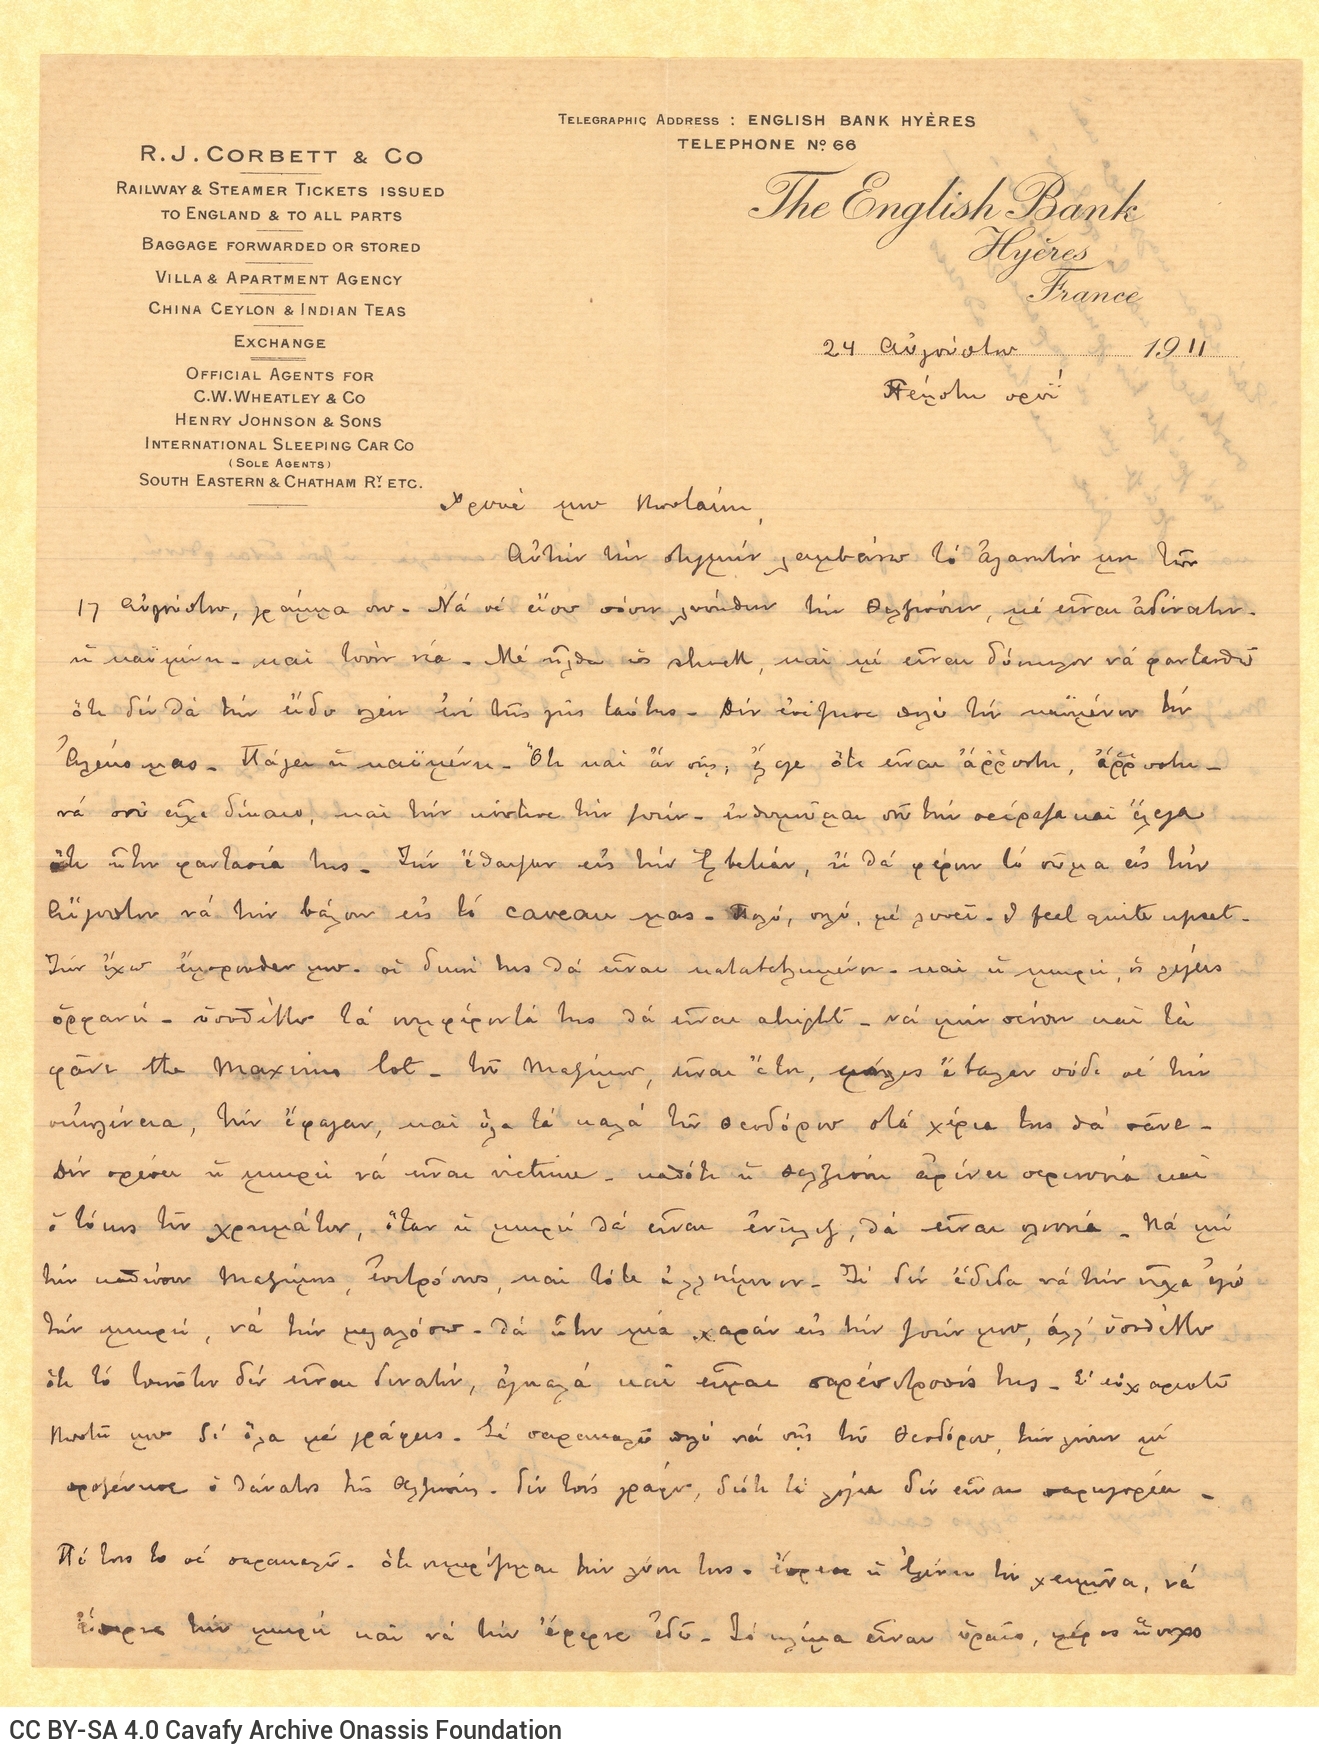 Handwritten letter by Paul Cavafy to C. P. Cavafy from Hyères, France, on both sides of a letterhead. In the largest part of